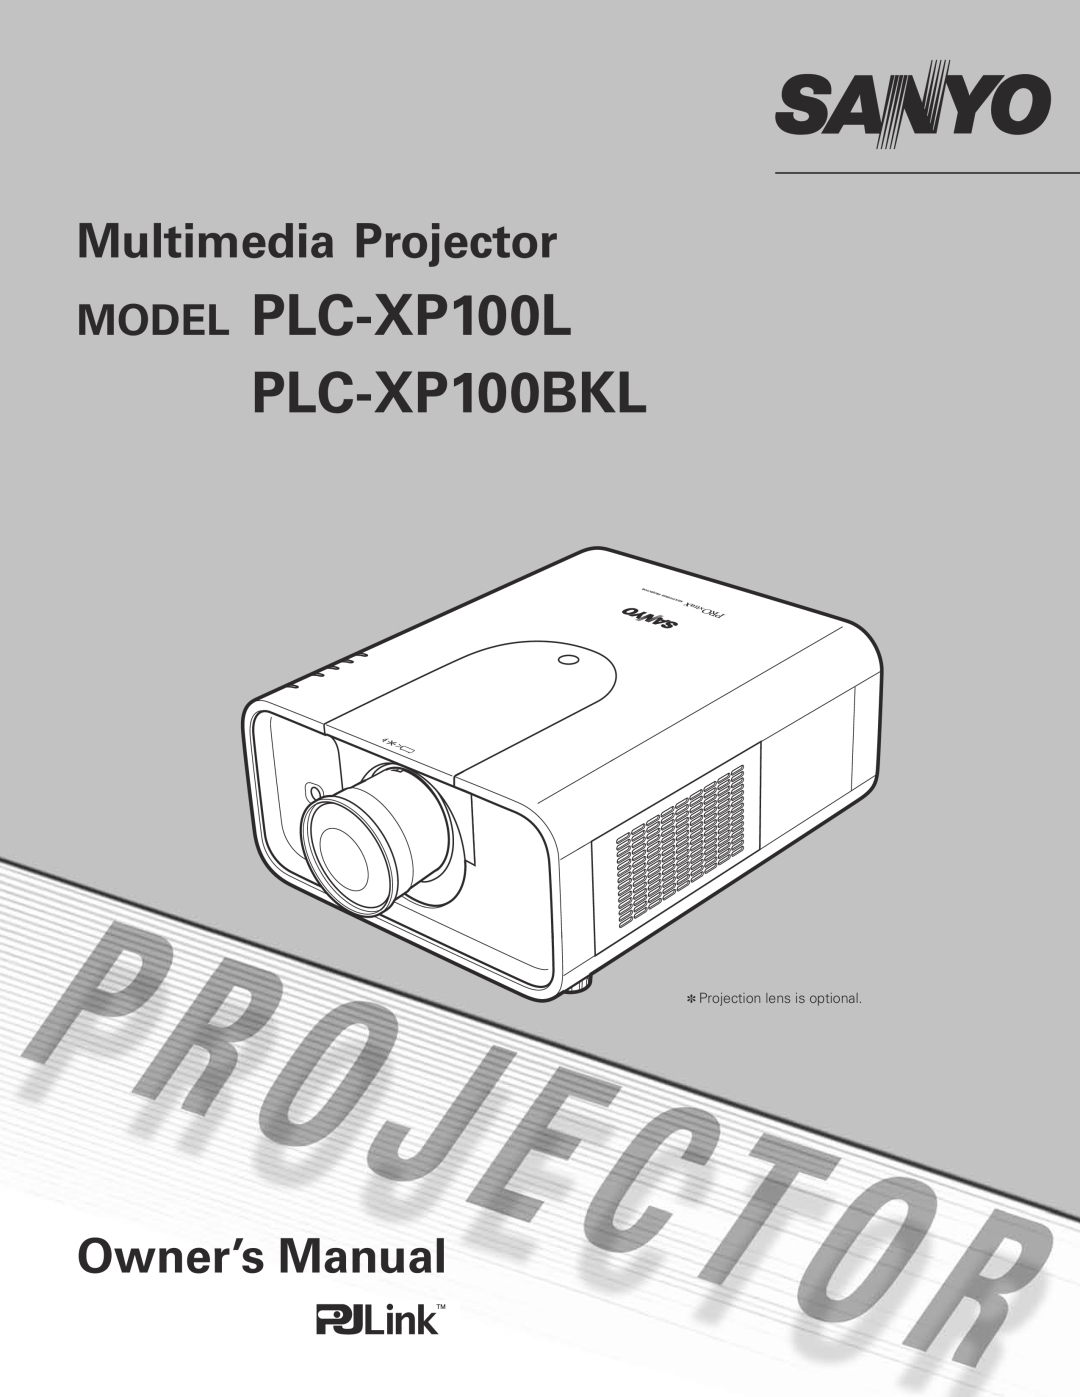 Sanyo owner manual MODEL PLC-XP100L PLC-XP100BKL, Multimedia Projector, Owner’s Manual, Projection lens is optional 